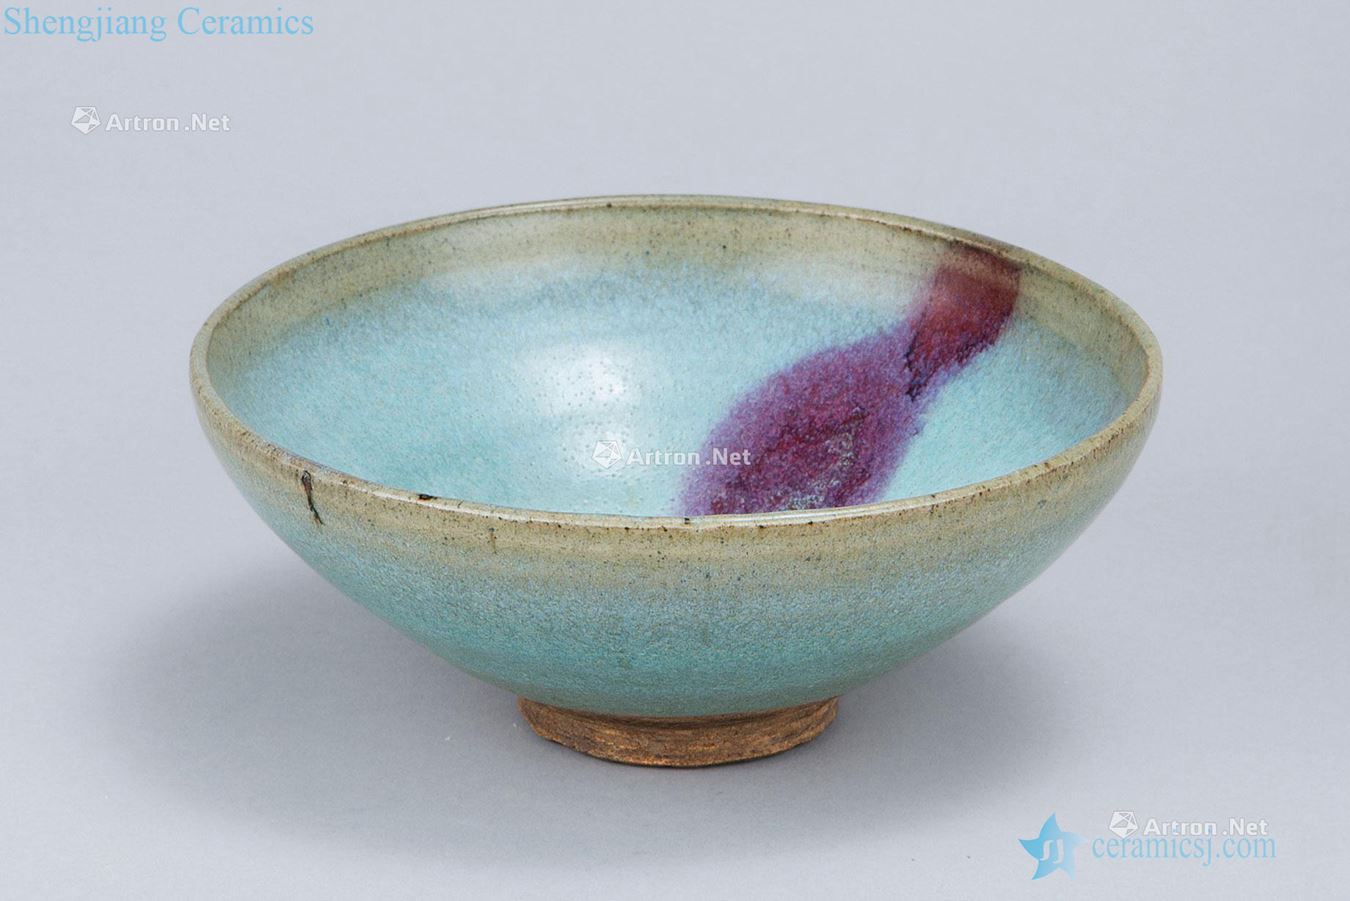 The yuan dynasty (1279-1368), purple masterpieces bowl